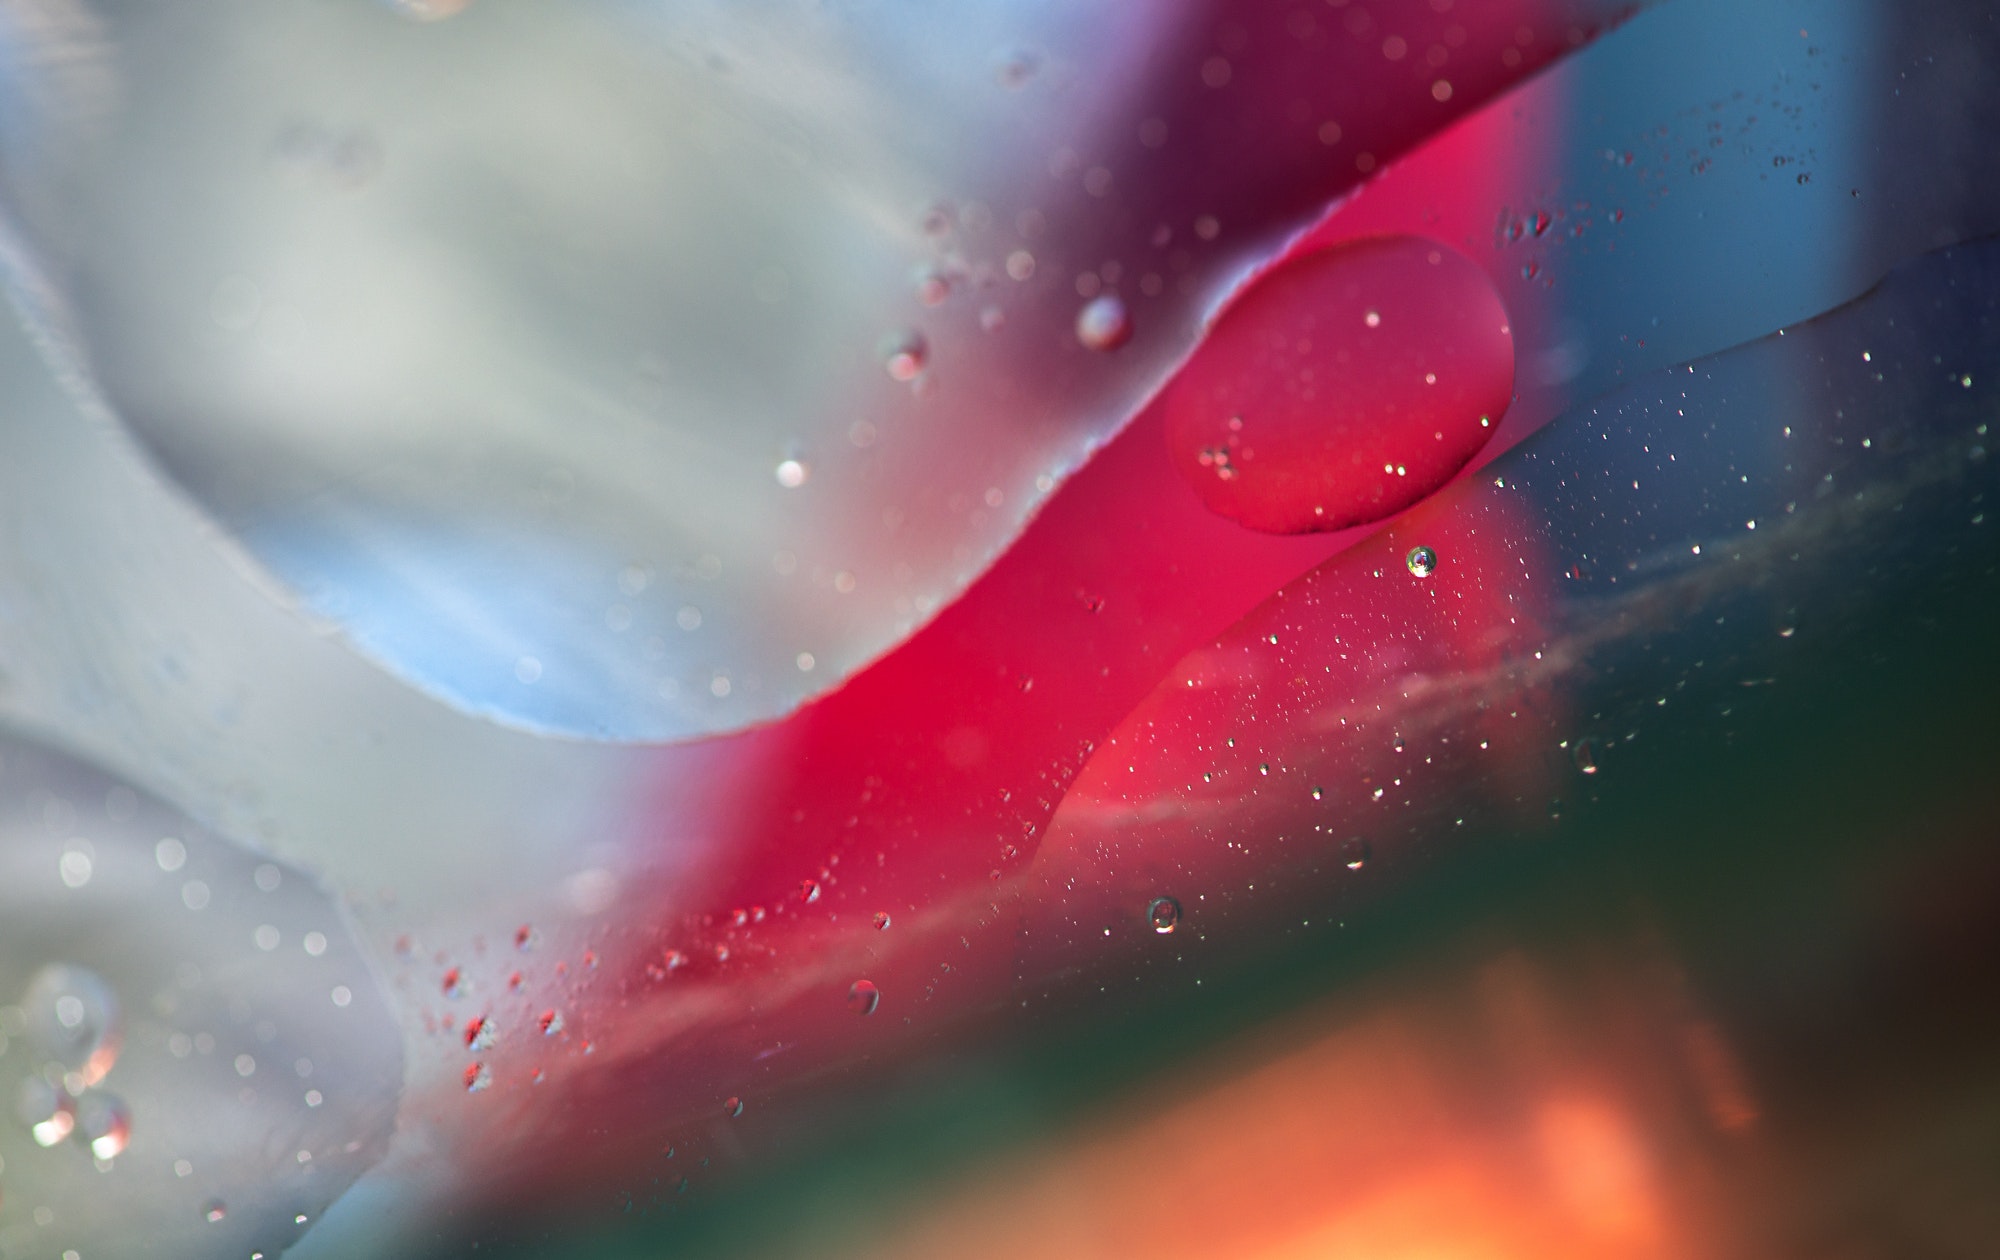 Univisiongovernance - Mood Picture - abstract liquid